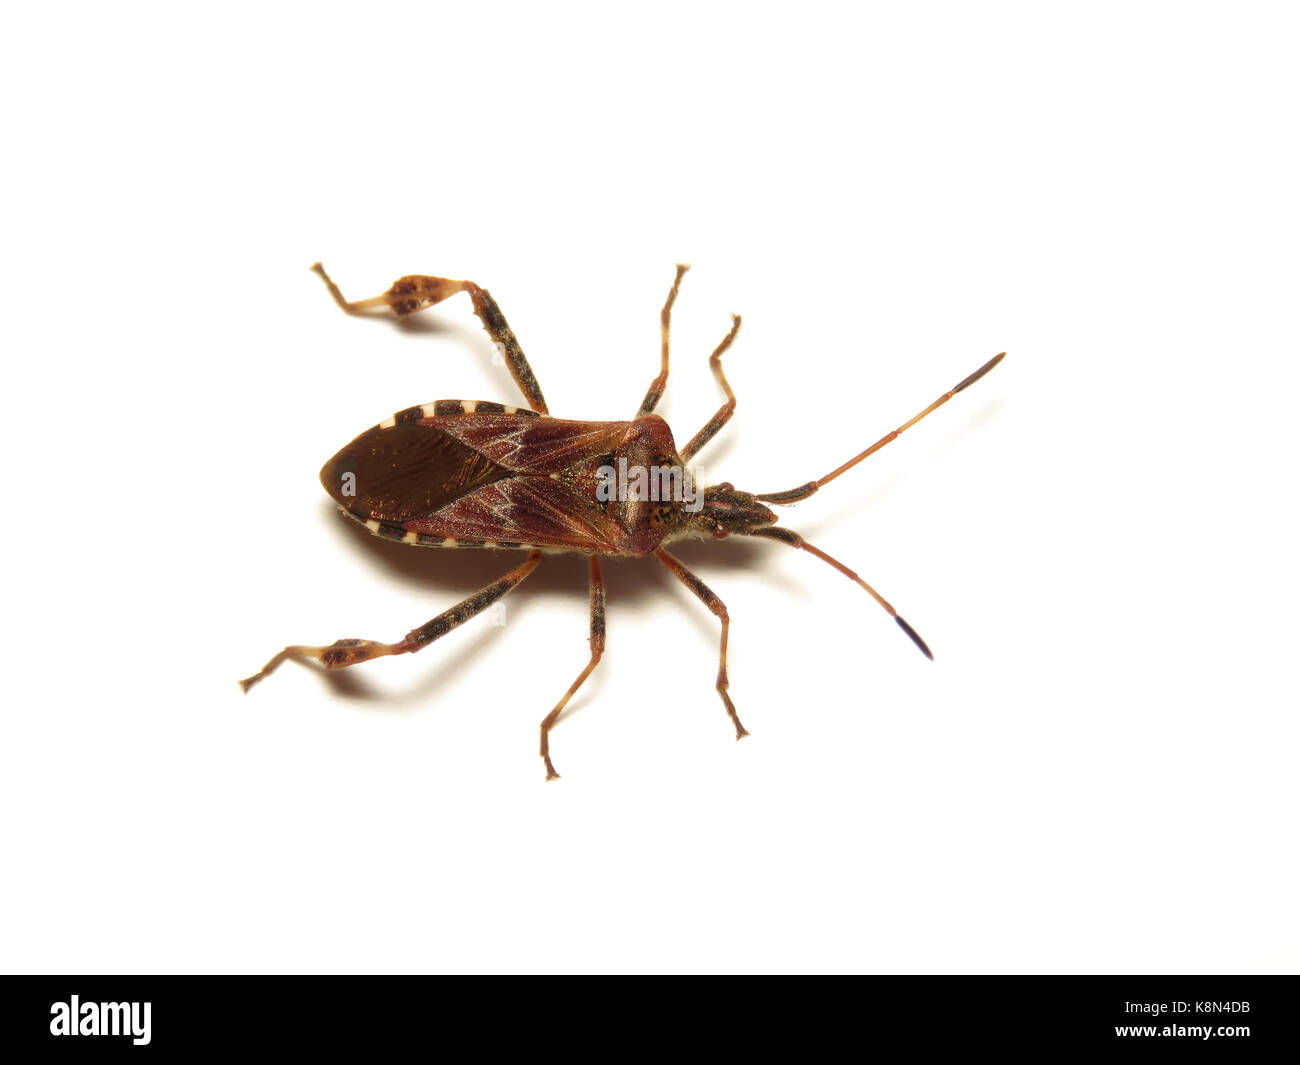 Western conifer seed bug (Leptoglossus occidentalis) found indoor in Western WA, USA Stock Photo